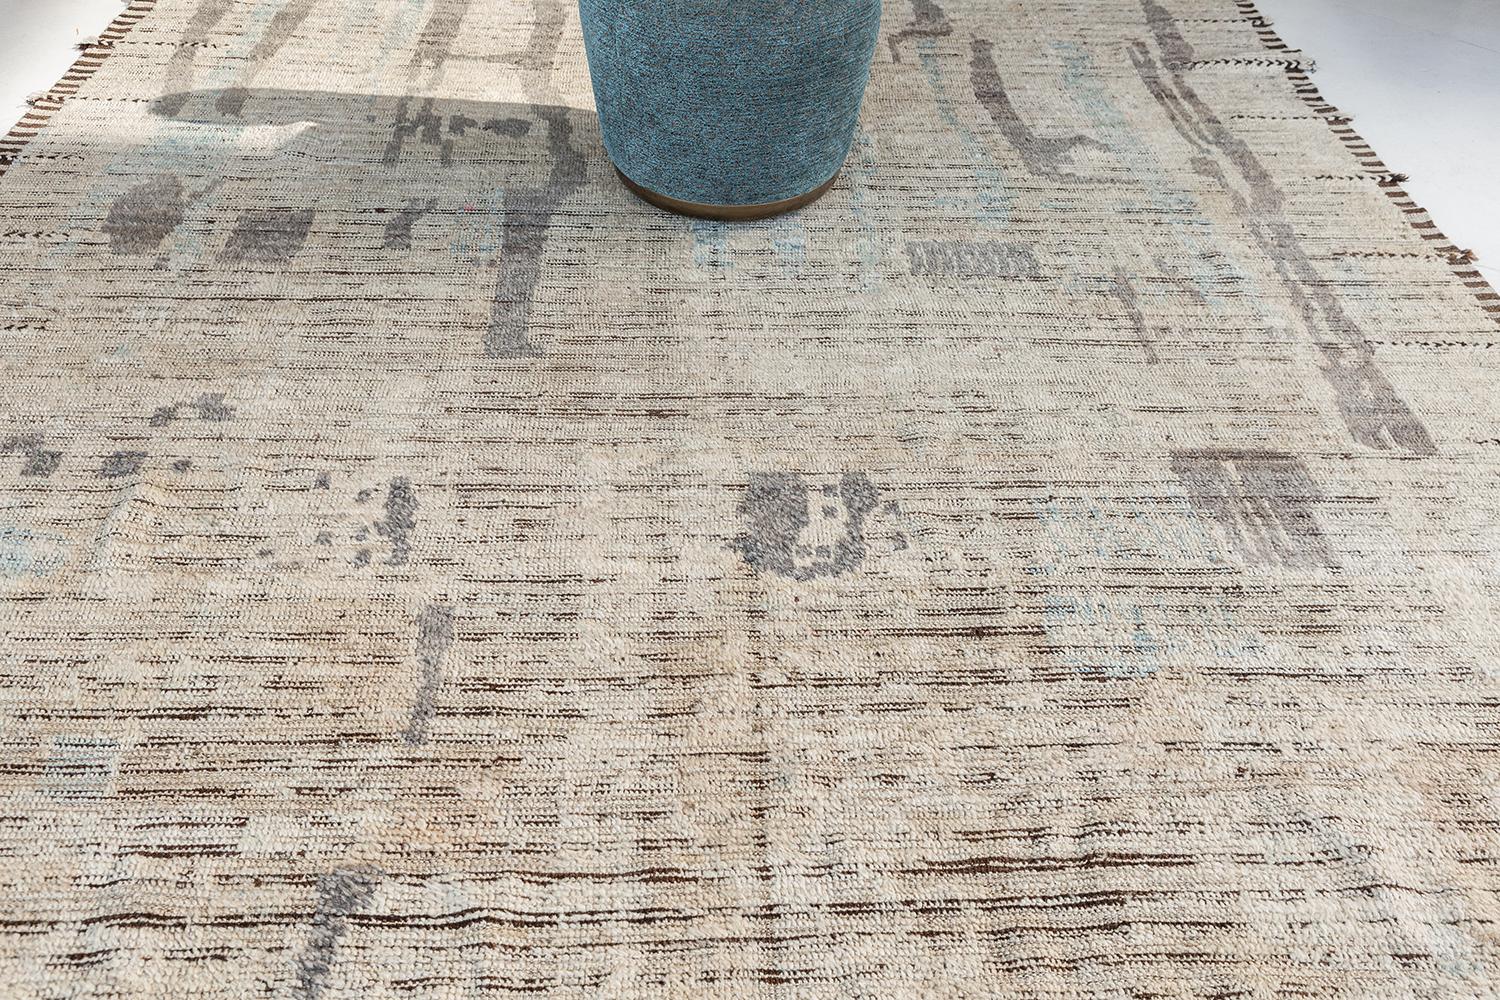 Halfah' is a natural earth toned pile weave and modern day interpretation of the Moroccan world. The rugs irregular shapes and strokes resemble the fibers of nature and their ability to be used for crafts such as cords and basketry. Designed in Los